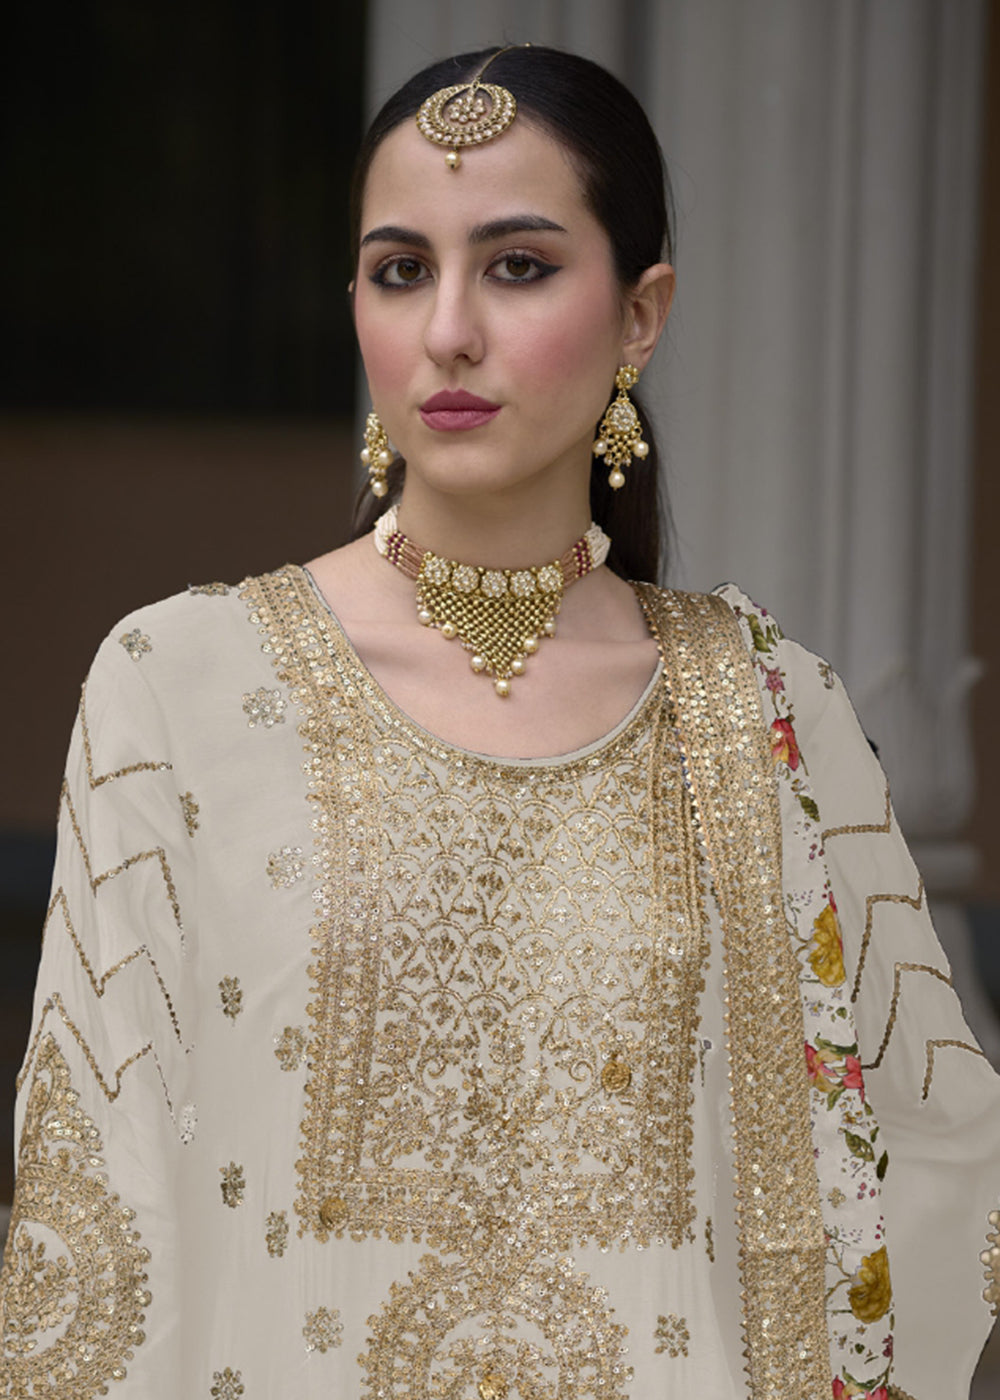 Buy Now Off White Pure Chinnon Pakistani Style Palazzo Suit Online in USA, UK, Canada, Germany, Australia & Worldwide at Empress Clothing.